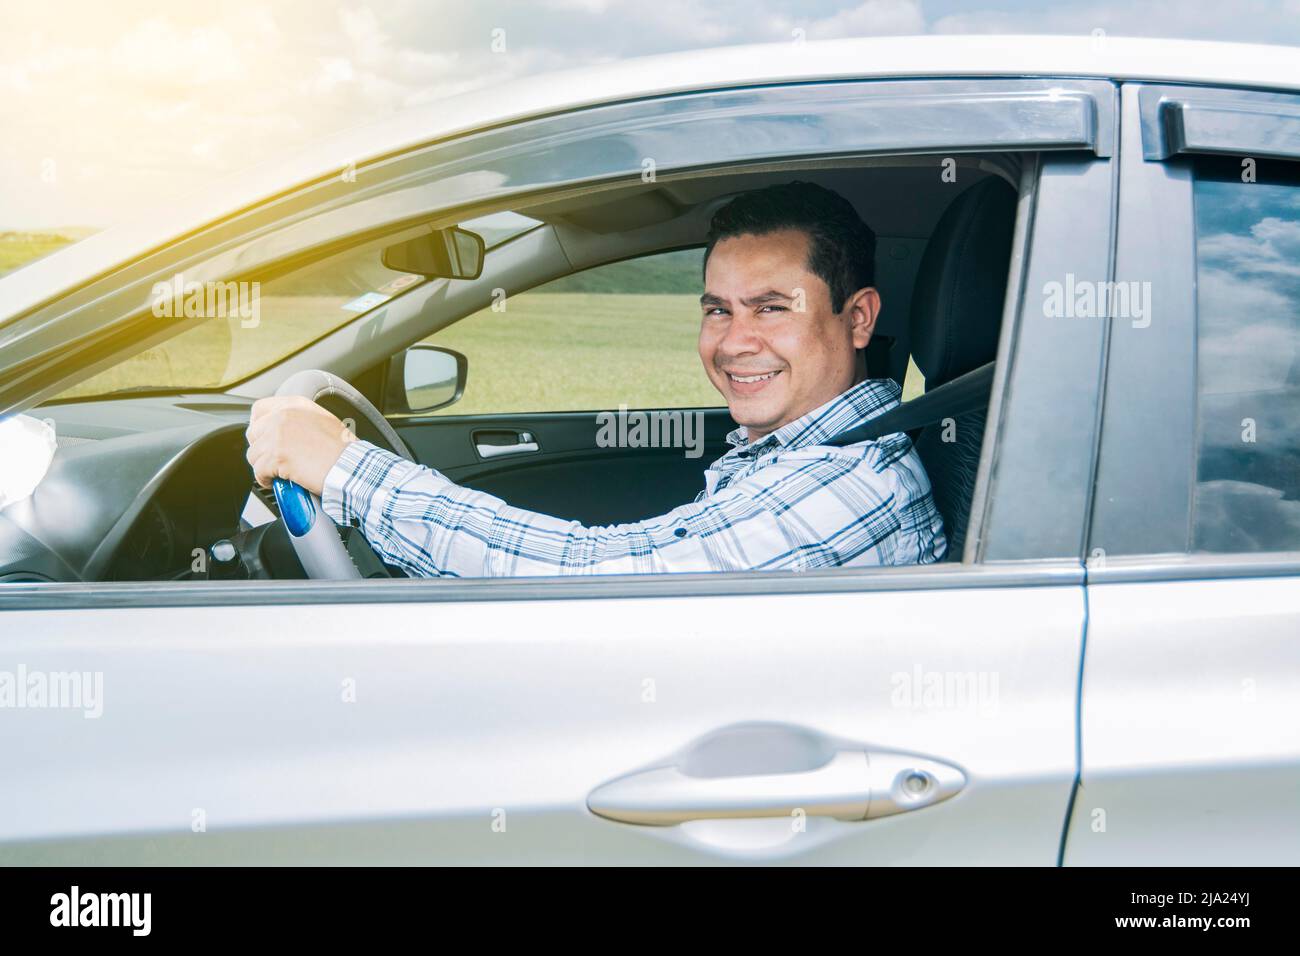 Man smiling at the camera in his car, man smiling happily in his car, image of a person smiling and happy driving a car and looking at the camera Stock Photo